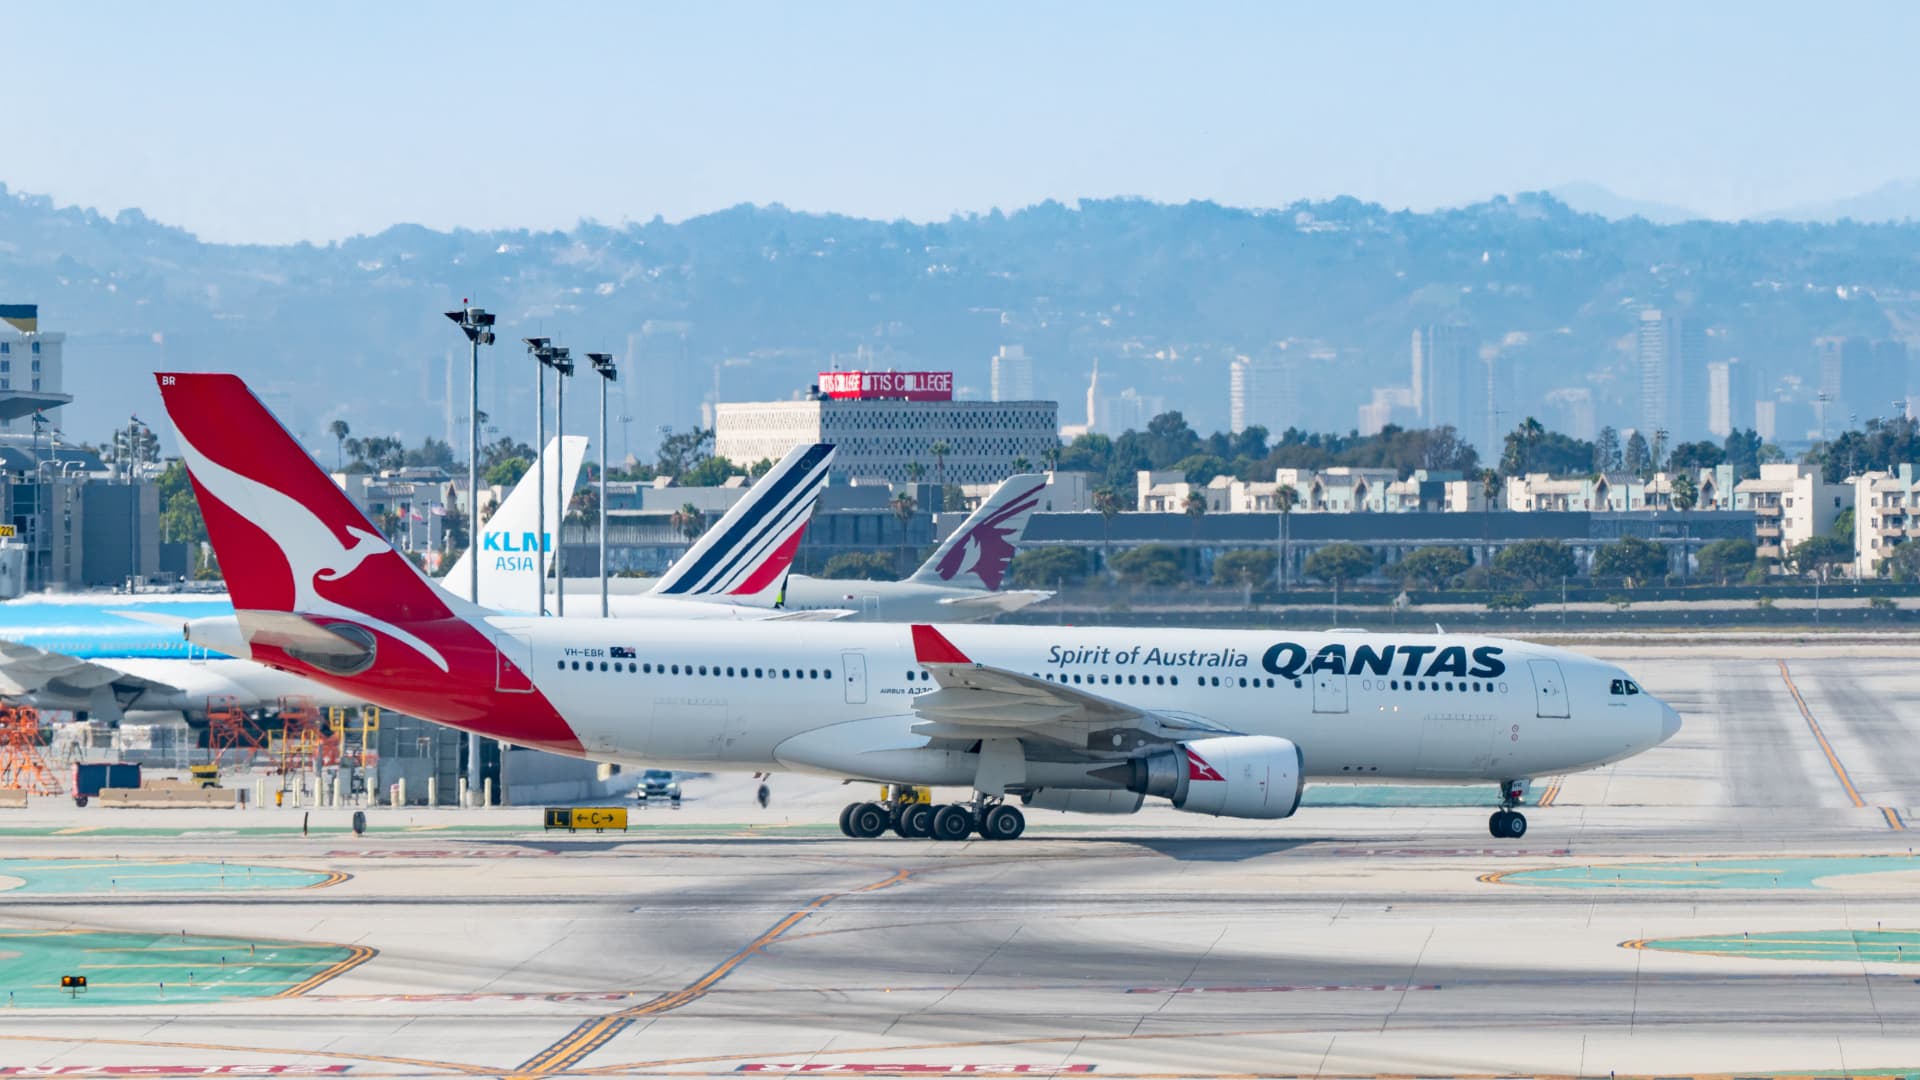 Qantas is confident it will return to 100% of its pre-Covid capacity in 2024